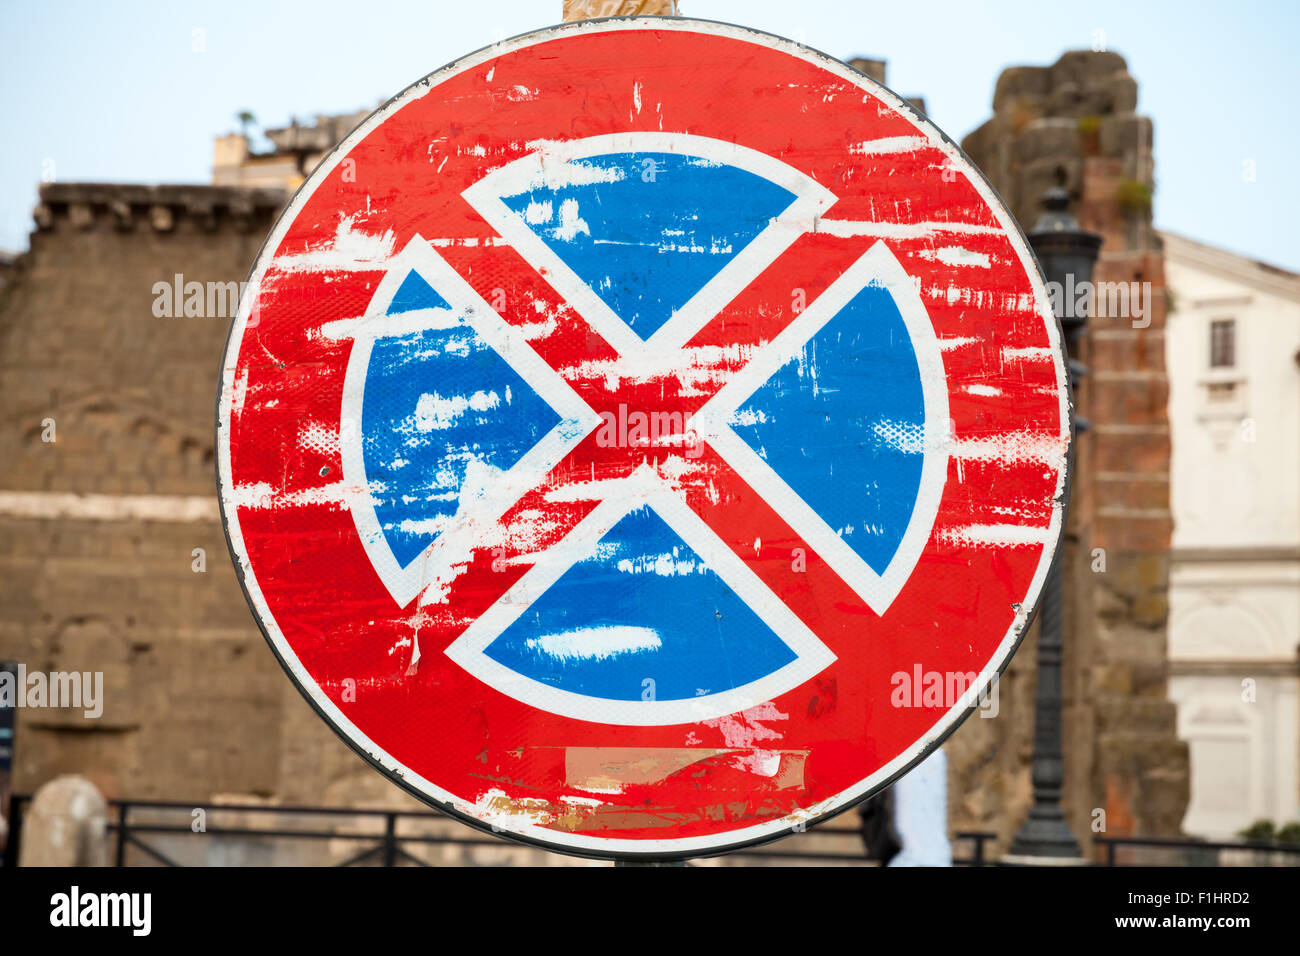 Round grungy road sign against old blurred city background, standing is prohibited Stock Photo